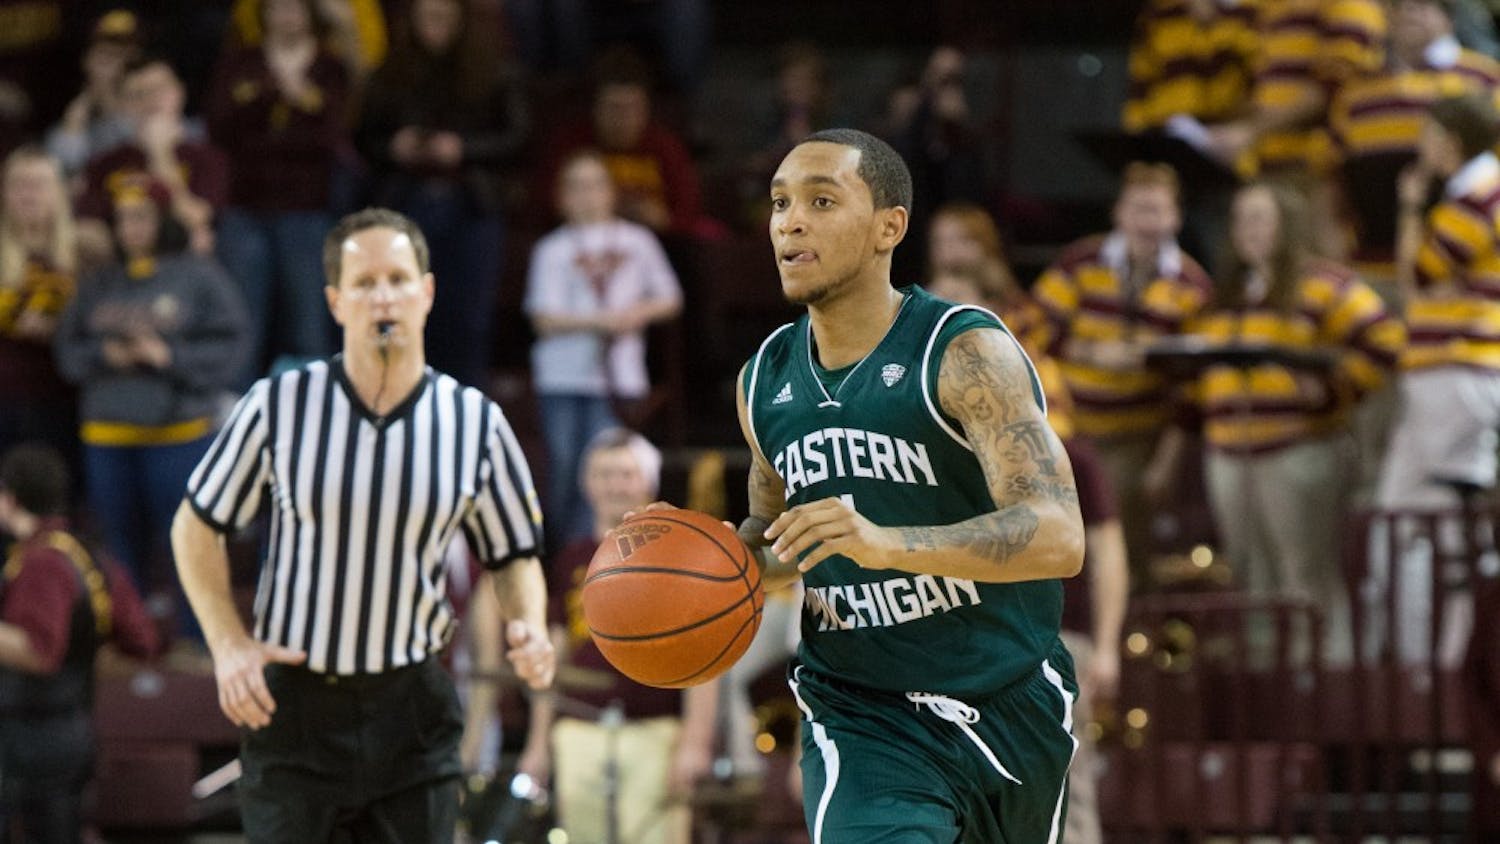 EMU guard Mike Talley (1) tied a career high with 21 points in Eastern Michigan's 72-59 win over Central Michigan in Mount Pleasant Saturday night.